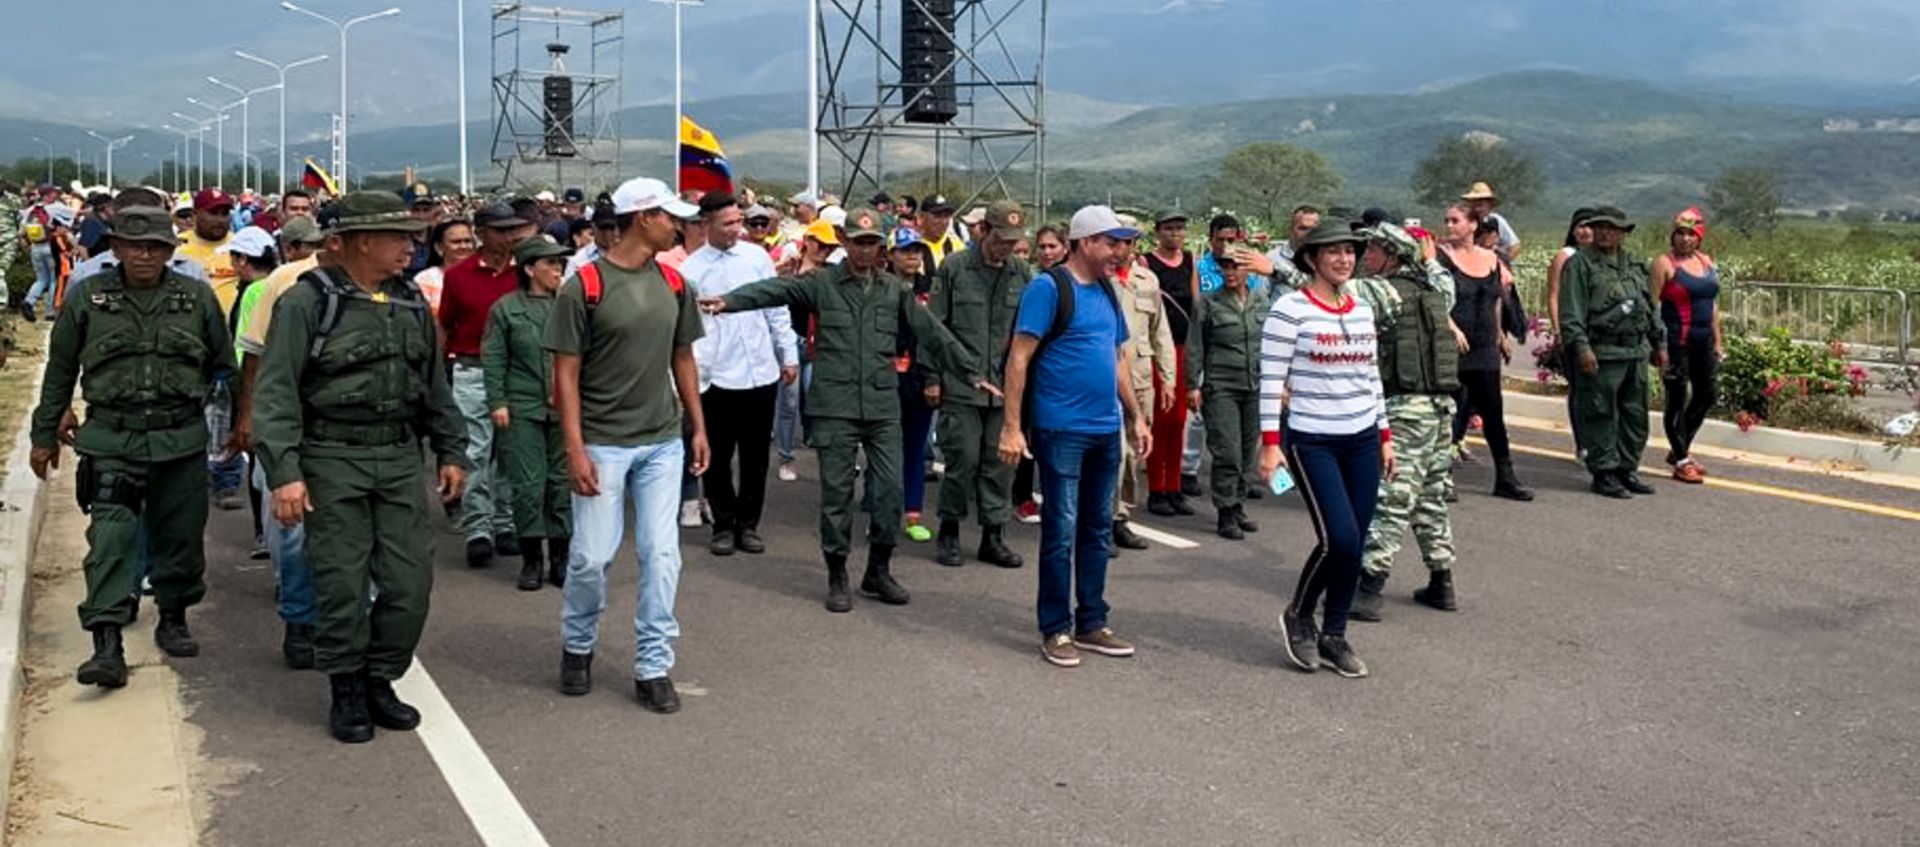 epa07389043 Dozens attend a concert called by Venezuelan President Nicolas Maduro at the border locality of Urena, in Venezuela, 22 February 2019, as a response to a concert organized by the opposition at the Colombian side of the border.  EPA/Hector Pereira MAXIMUM QUALITY AVAILABLE